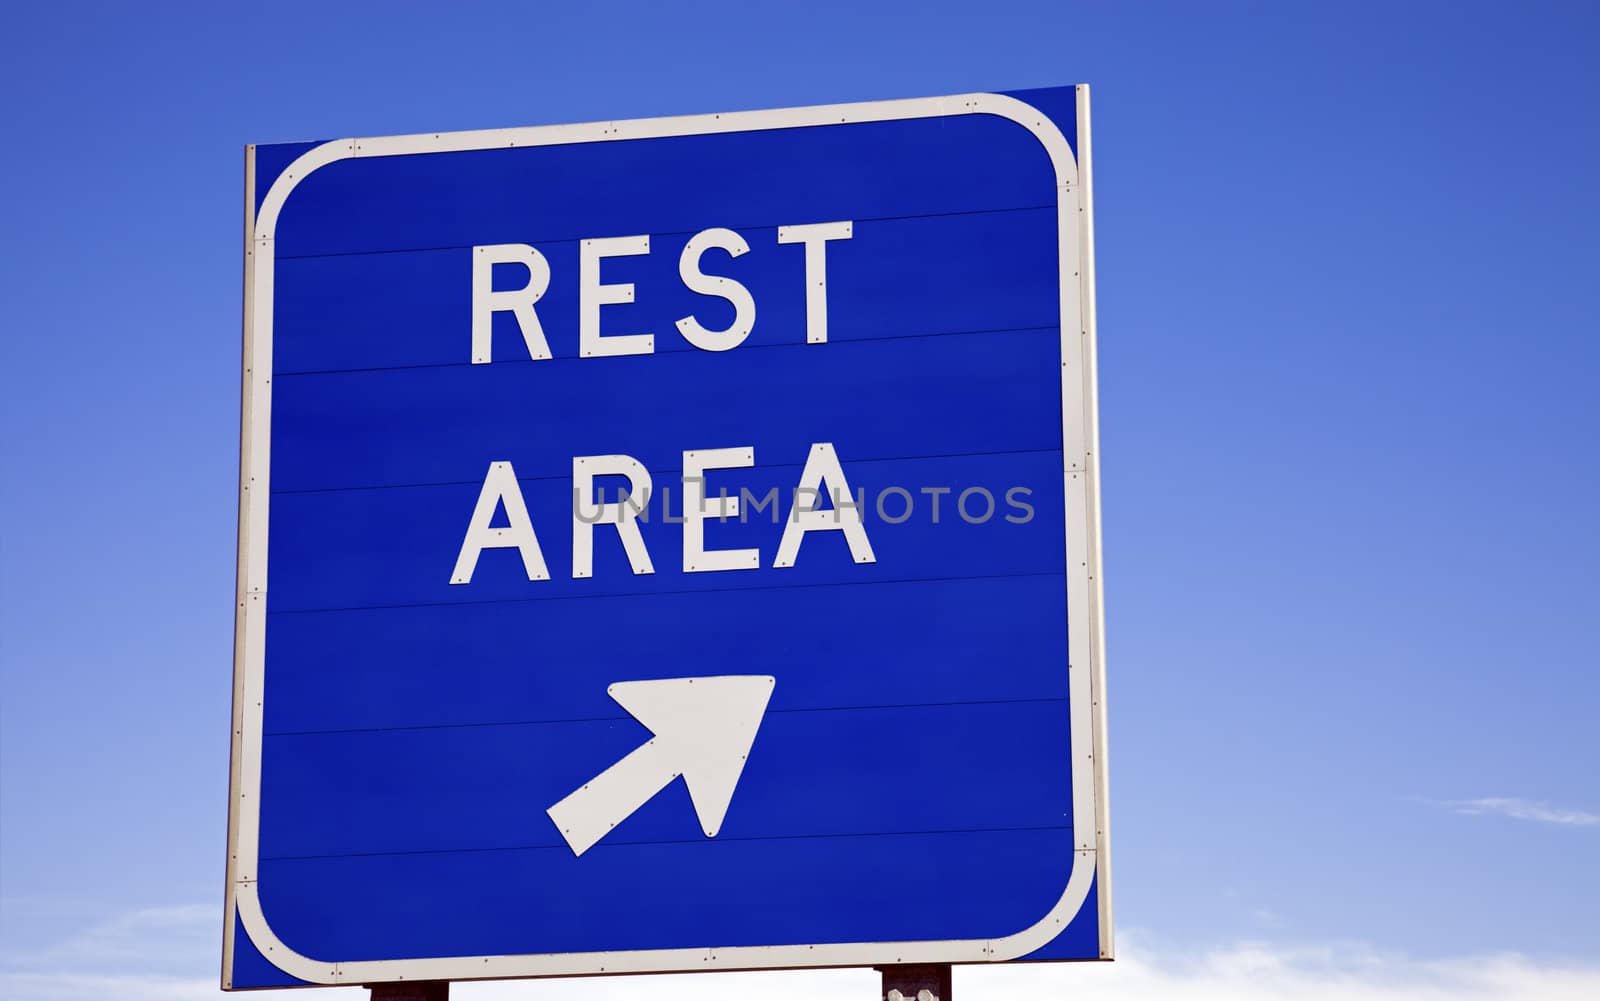 Rest area sign on the highway.